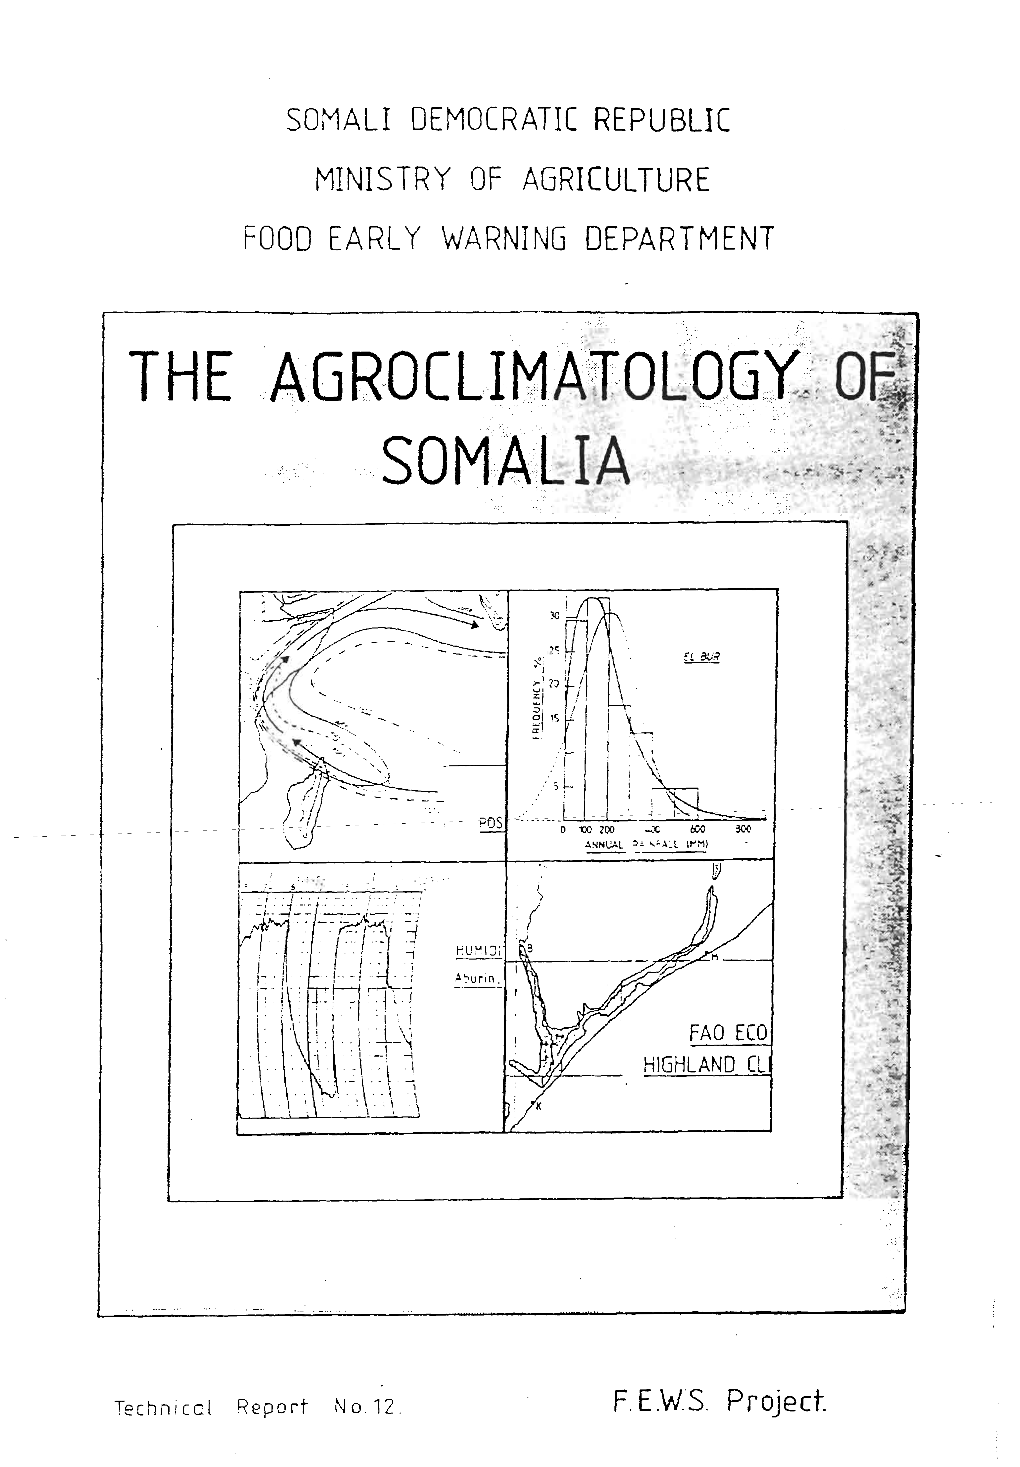 SOMALI DEMOCRATIC REPUBLIC MINISTRY of AGRICULTURE FOOD EARLY WARNING DEPARTMENT F. E.W.S. Project